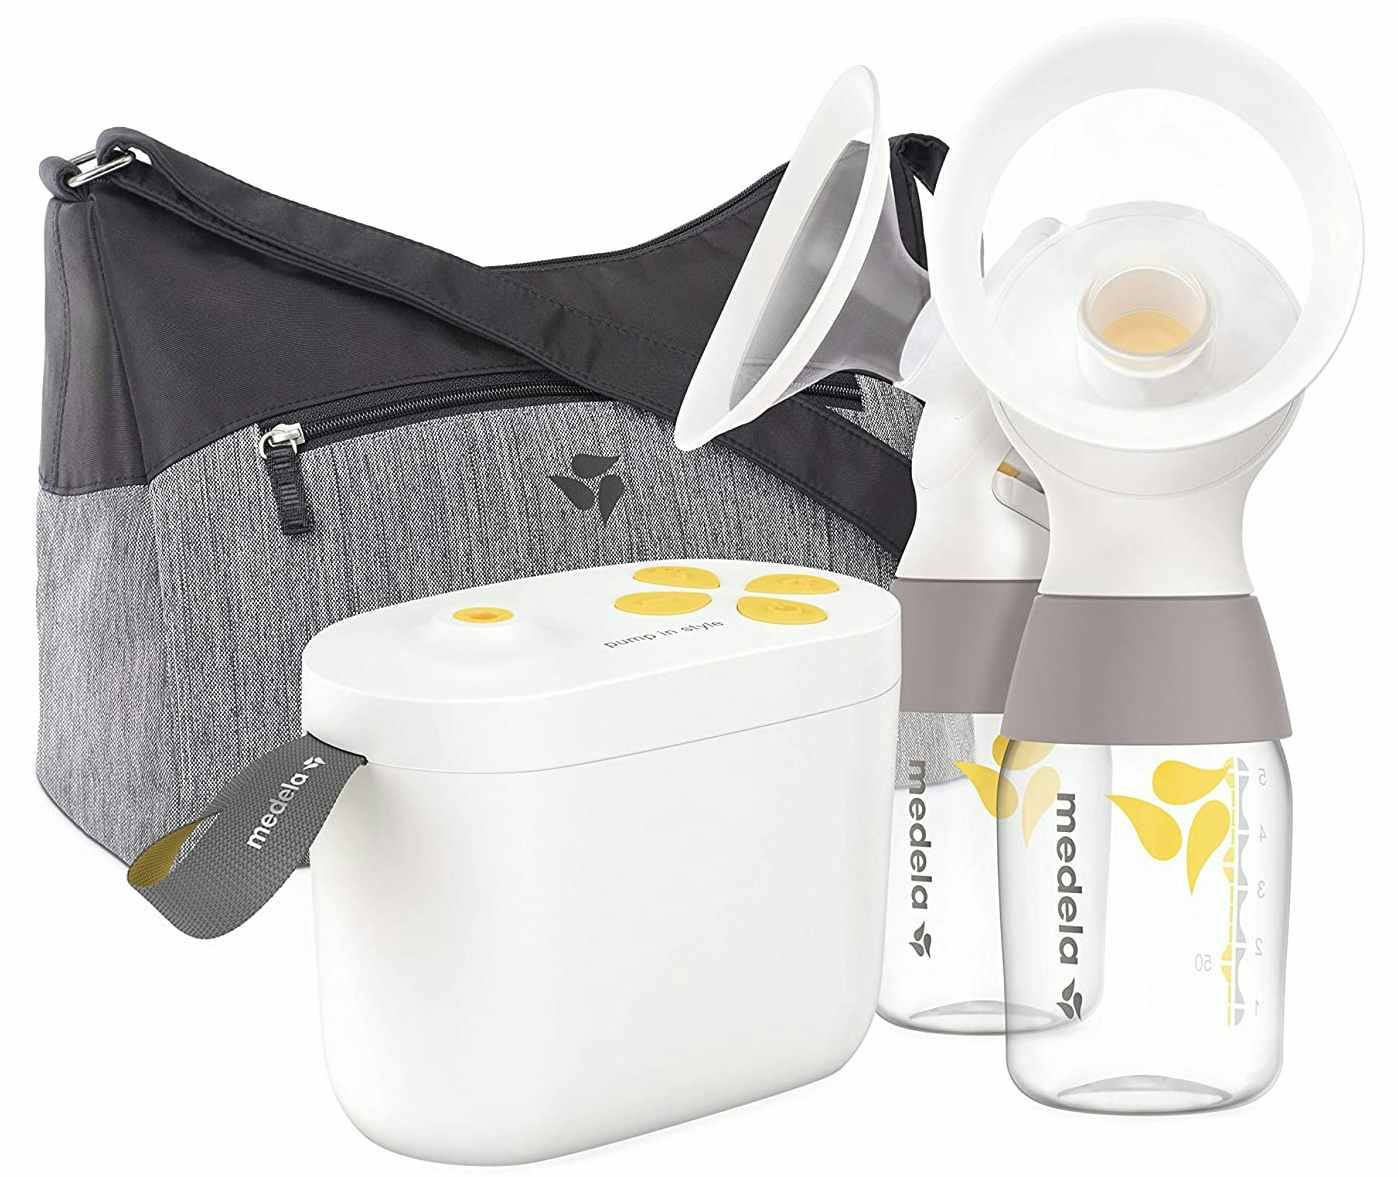 A Medela Pump in Style with MaxFlow breast pump on a white background.